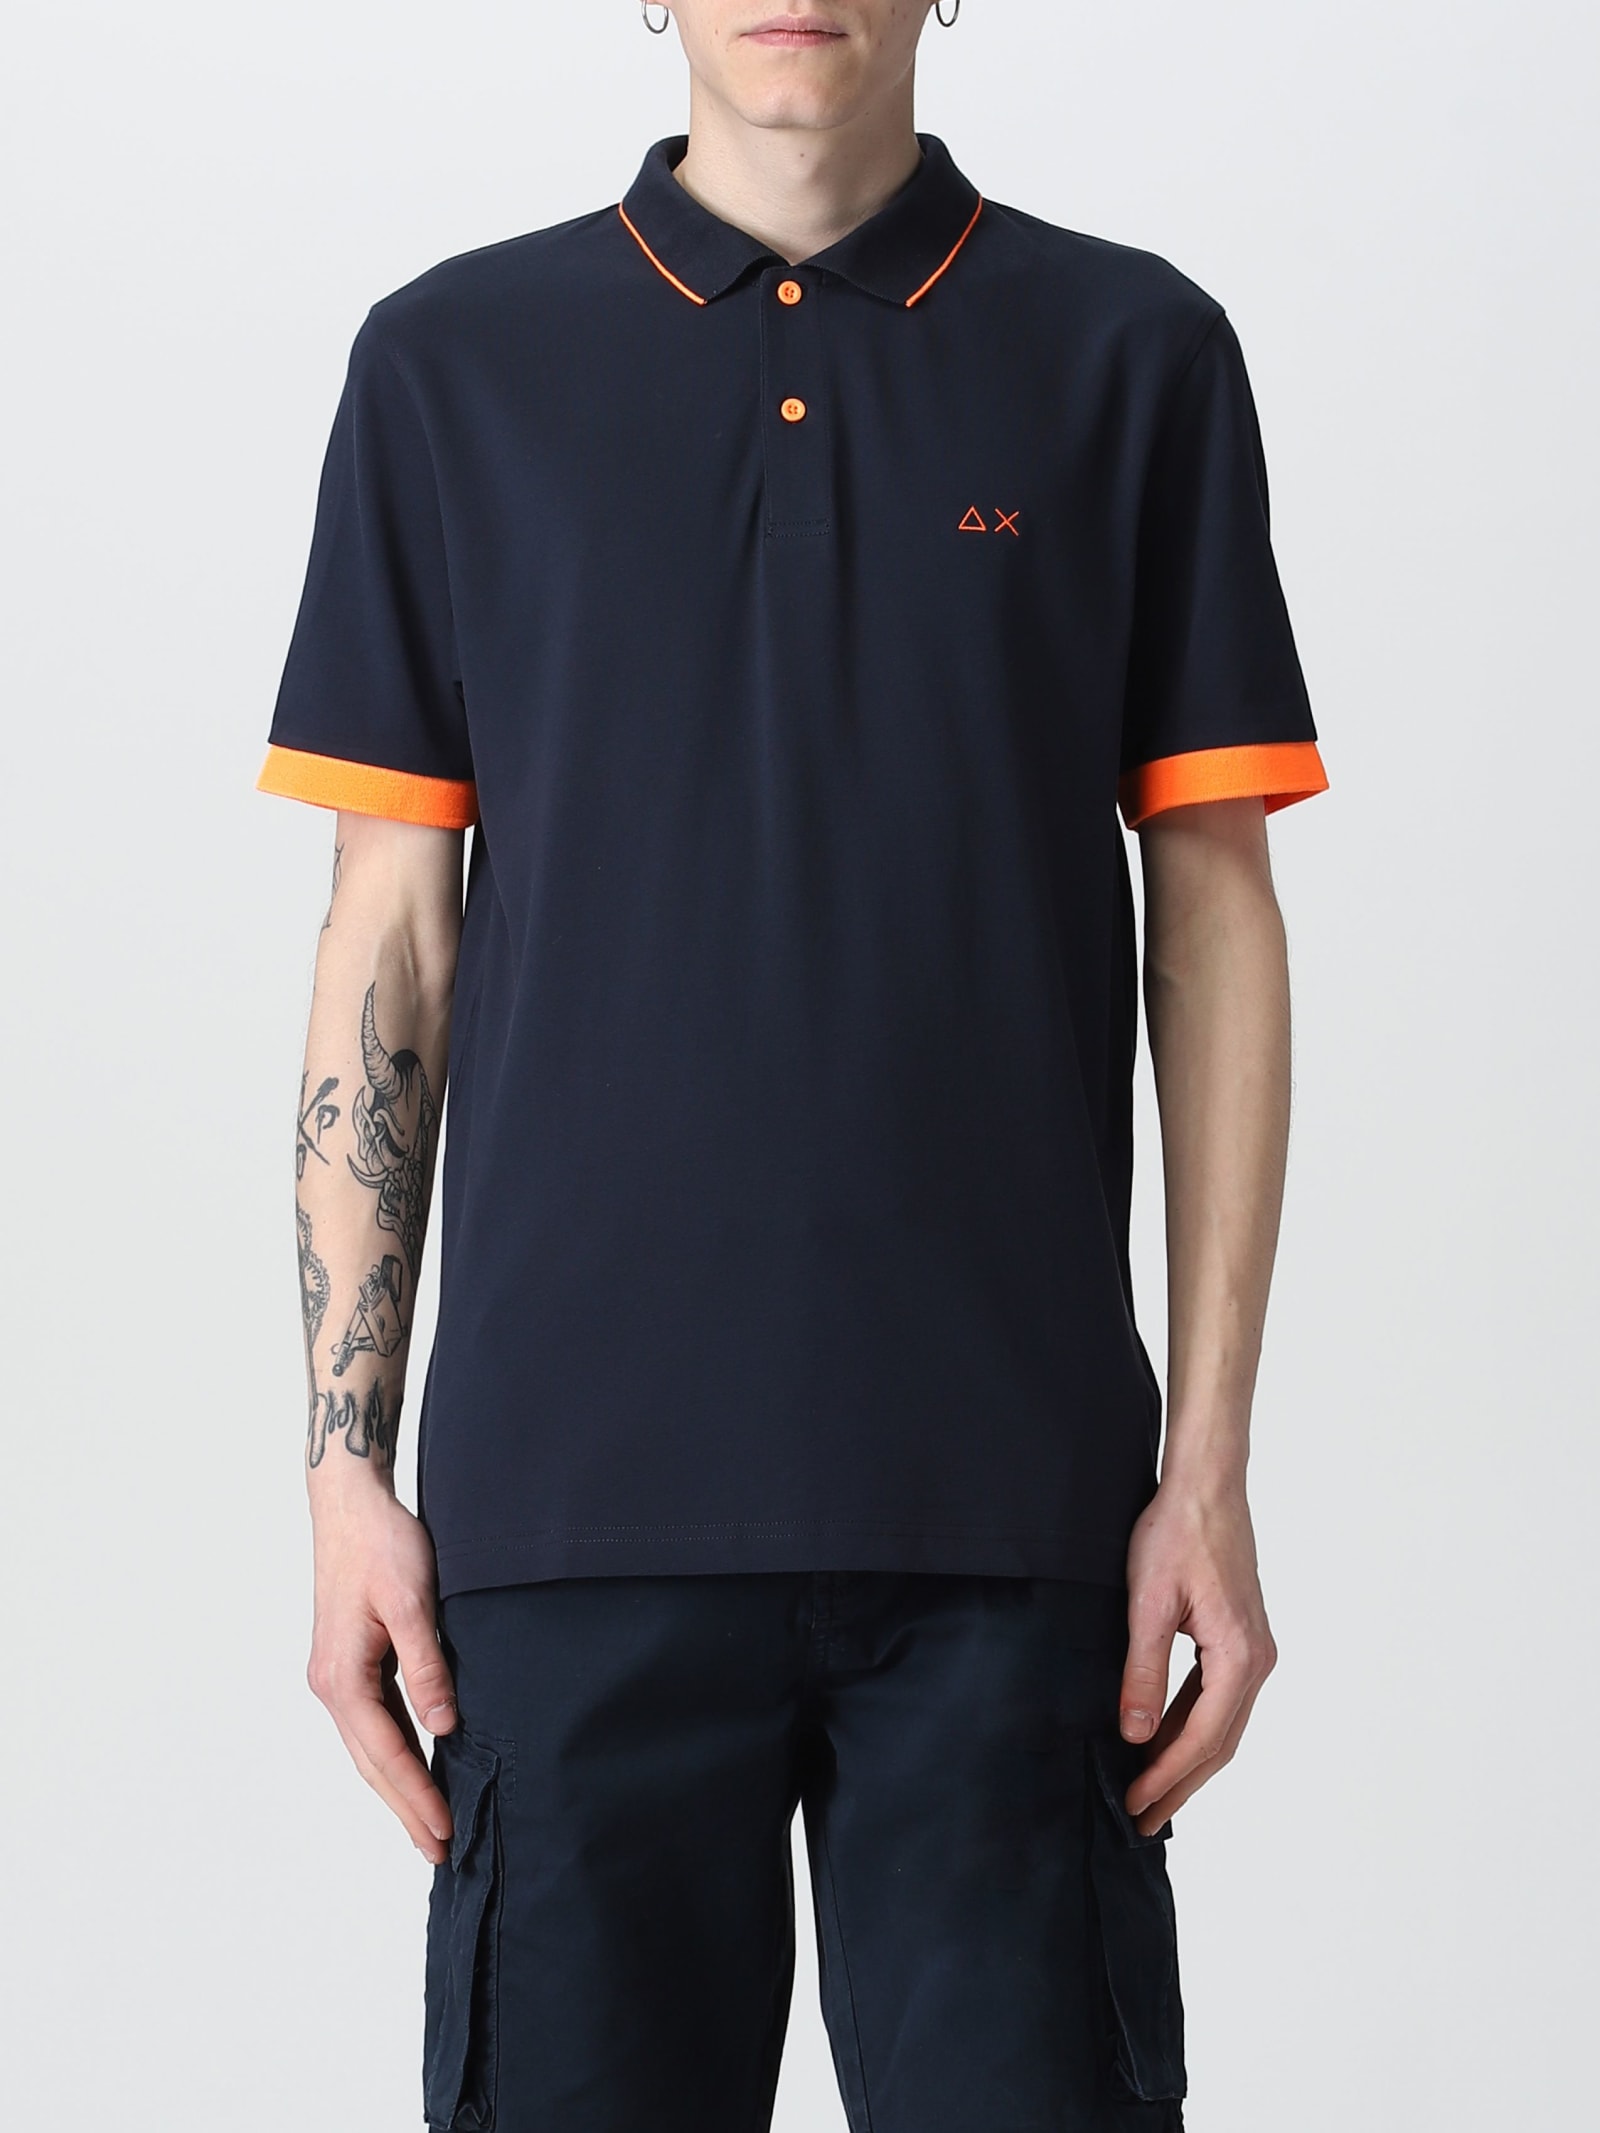 SUN 68 TOPO TAIL POLO SHIRT AND FLUO SLEEVE